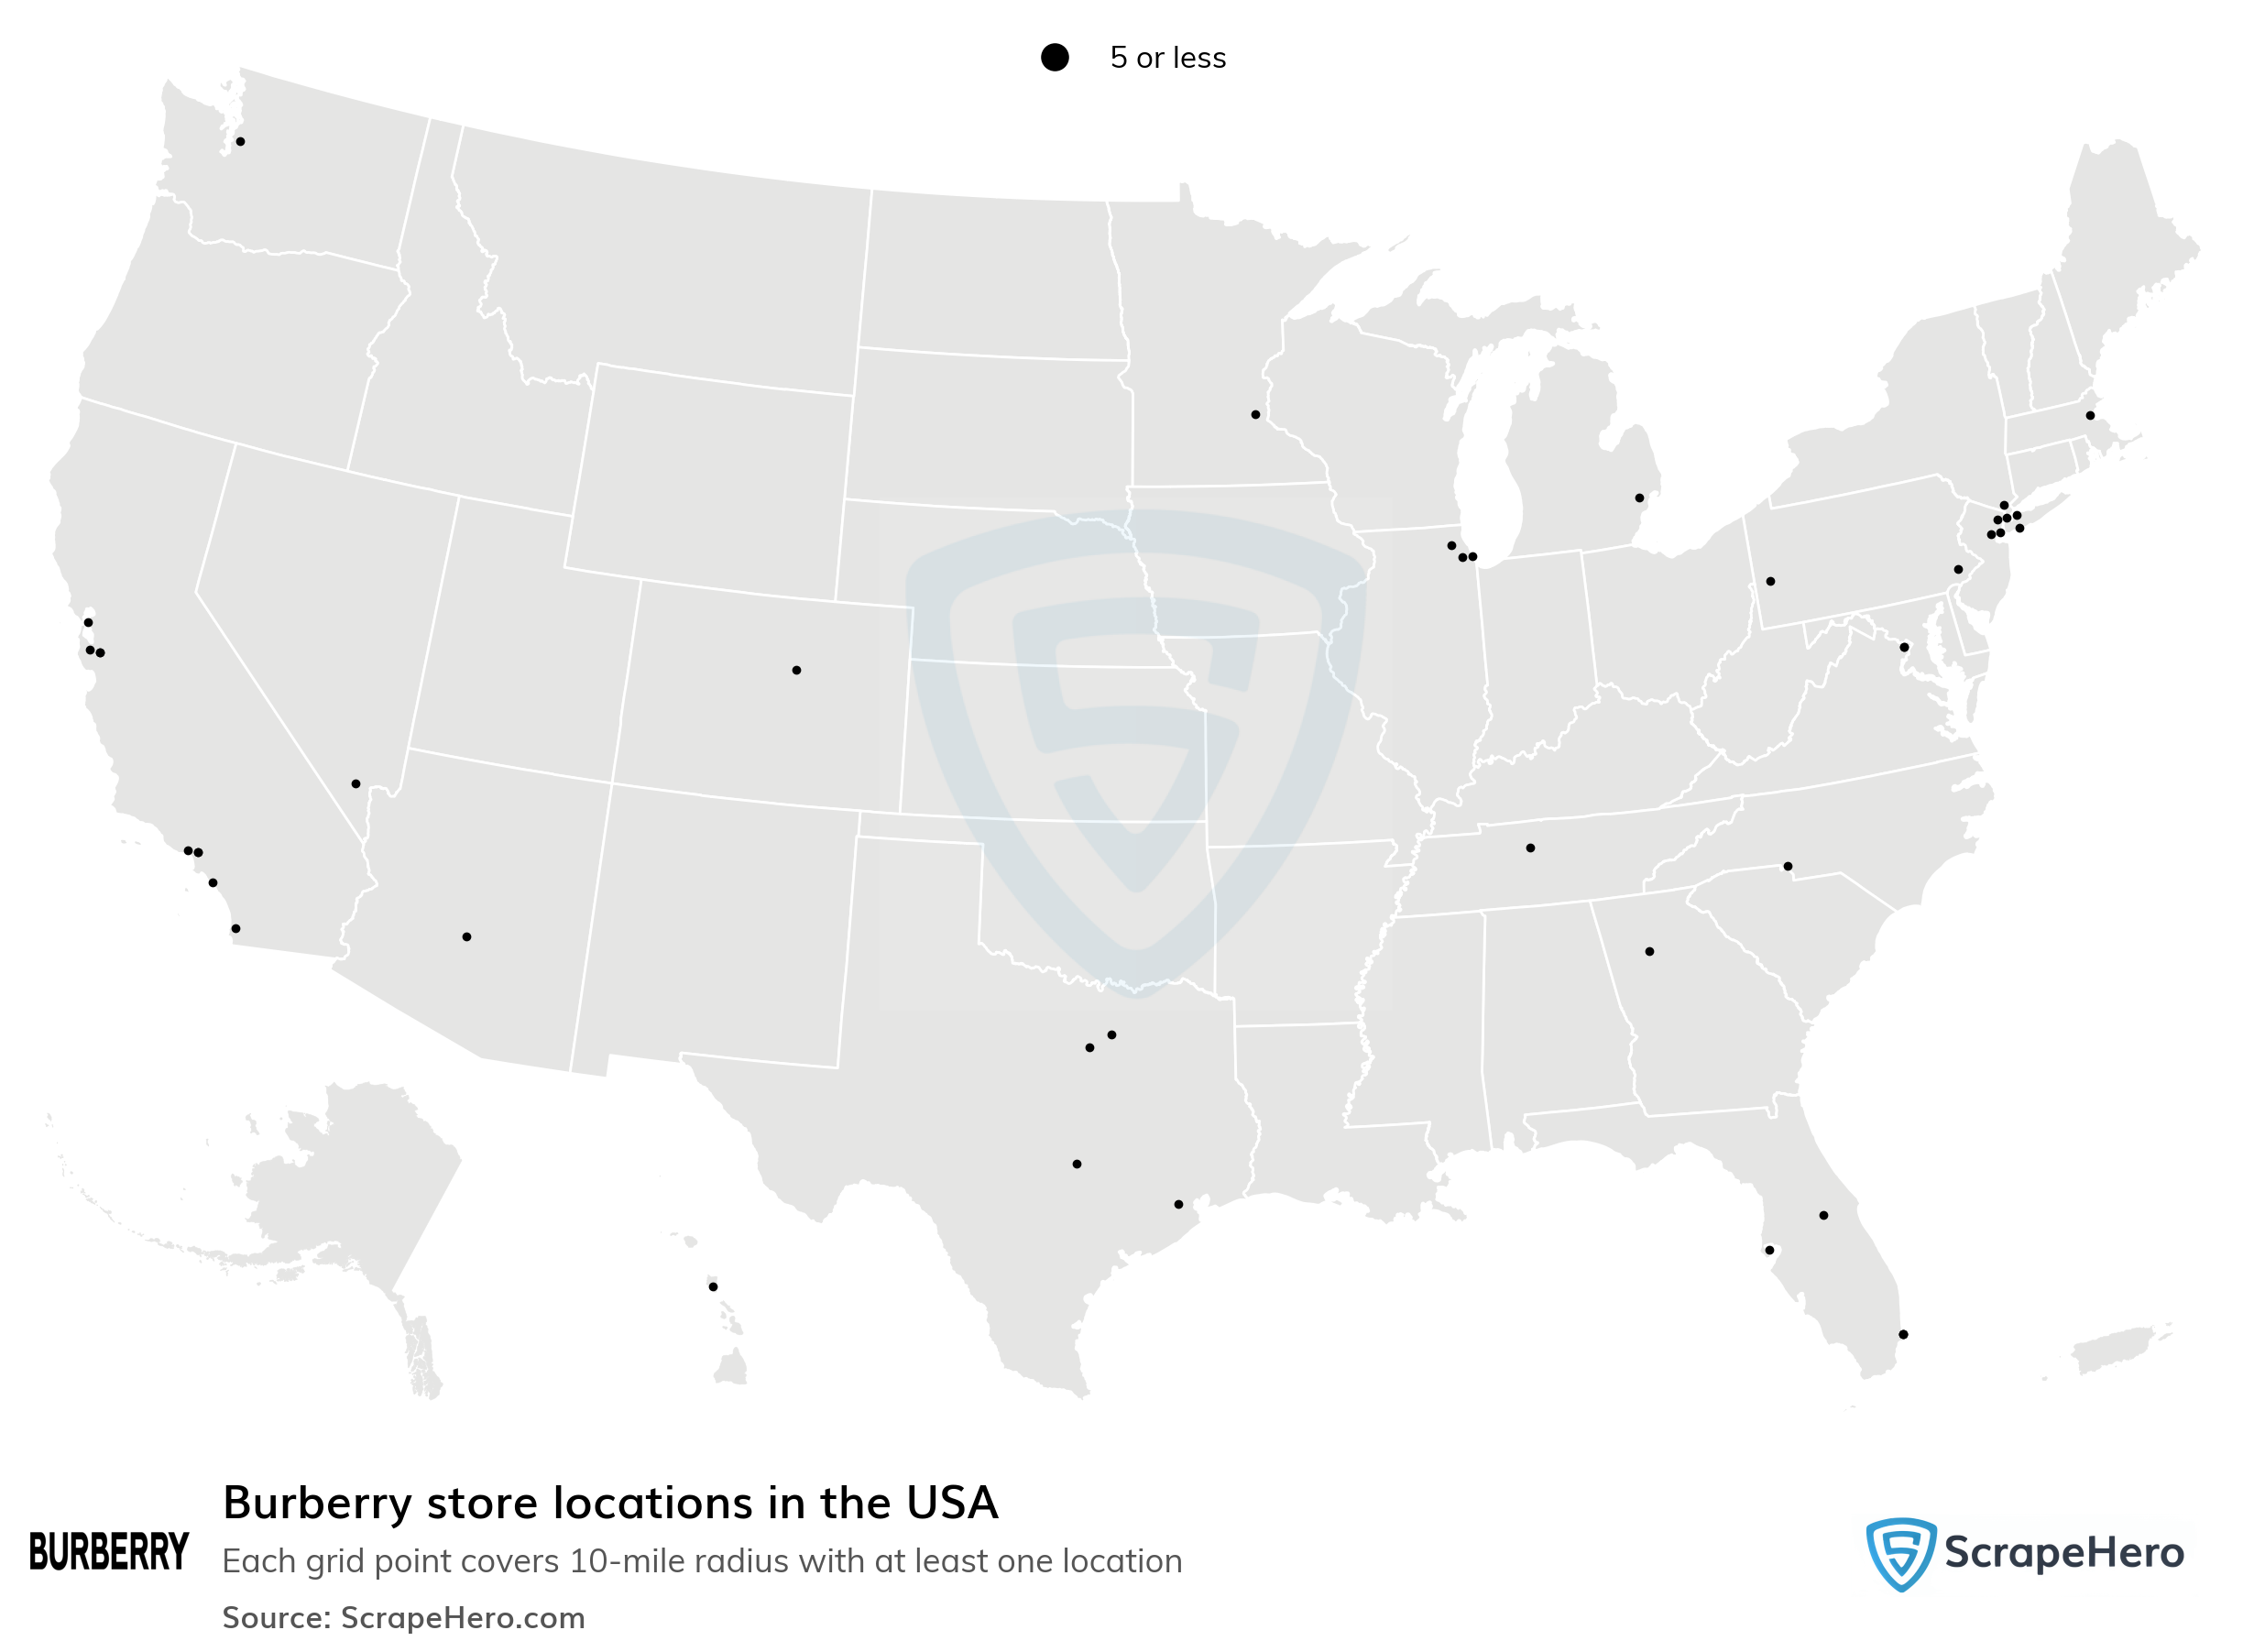 Number of Burberry locations in the USA in 2023 | ScrapeHero